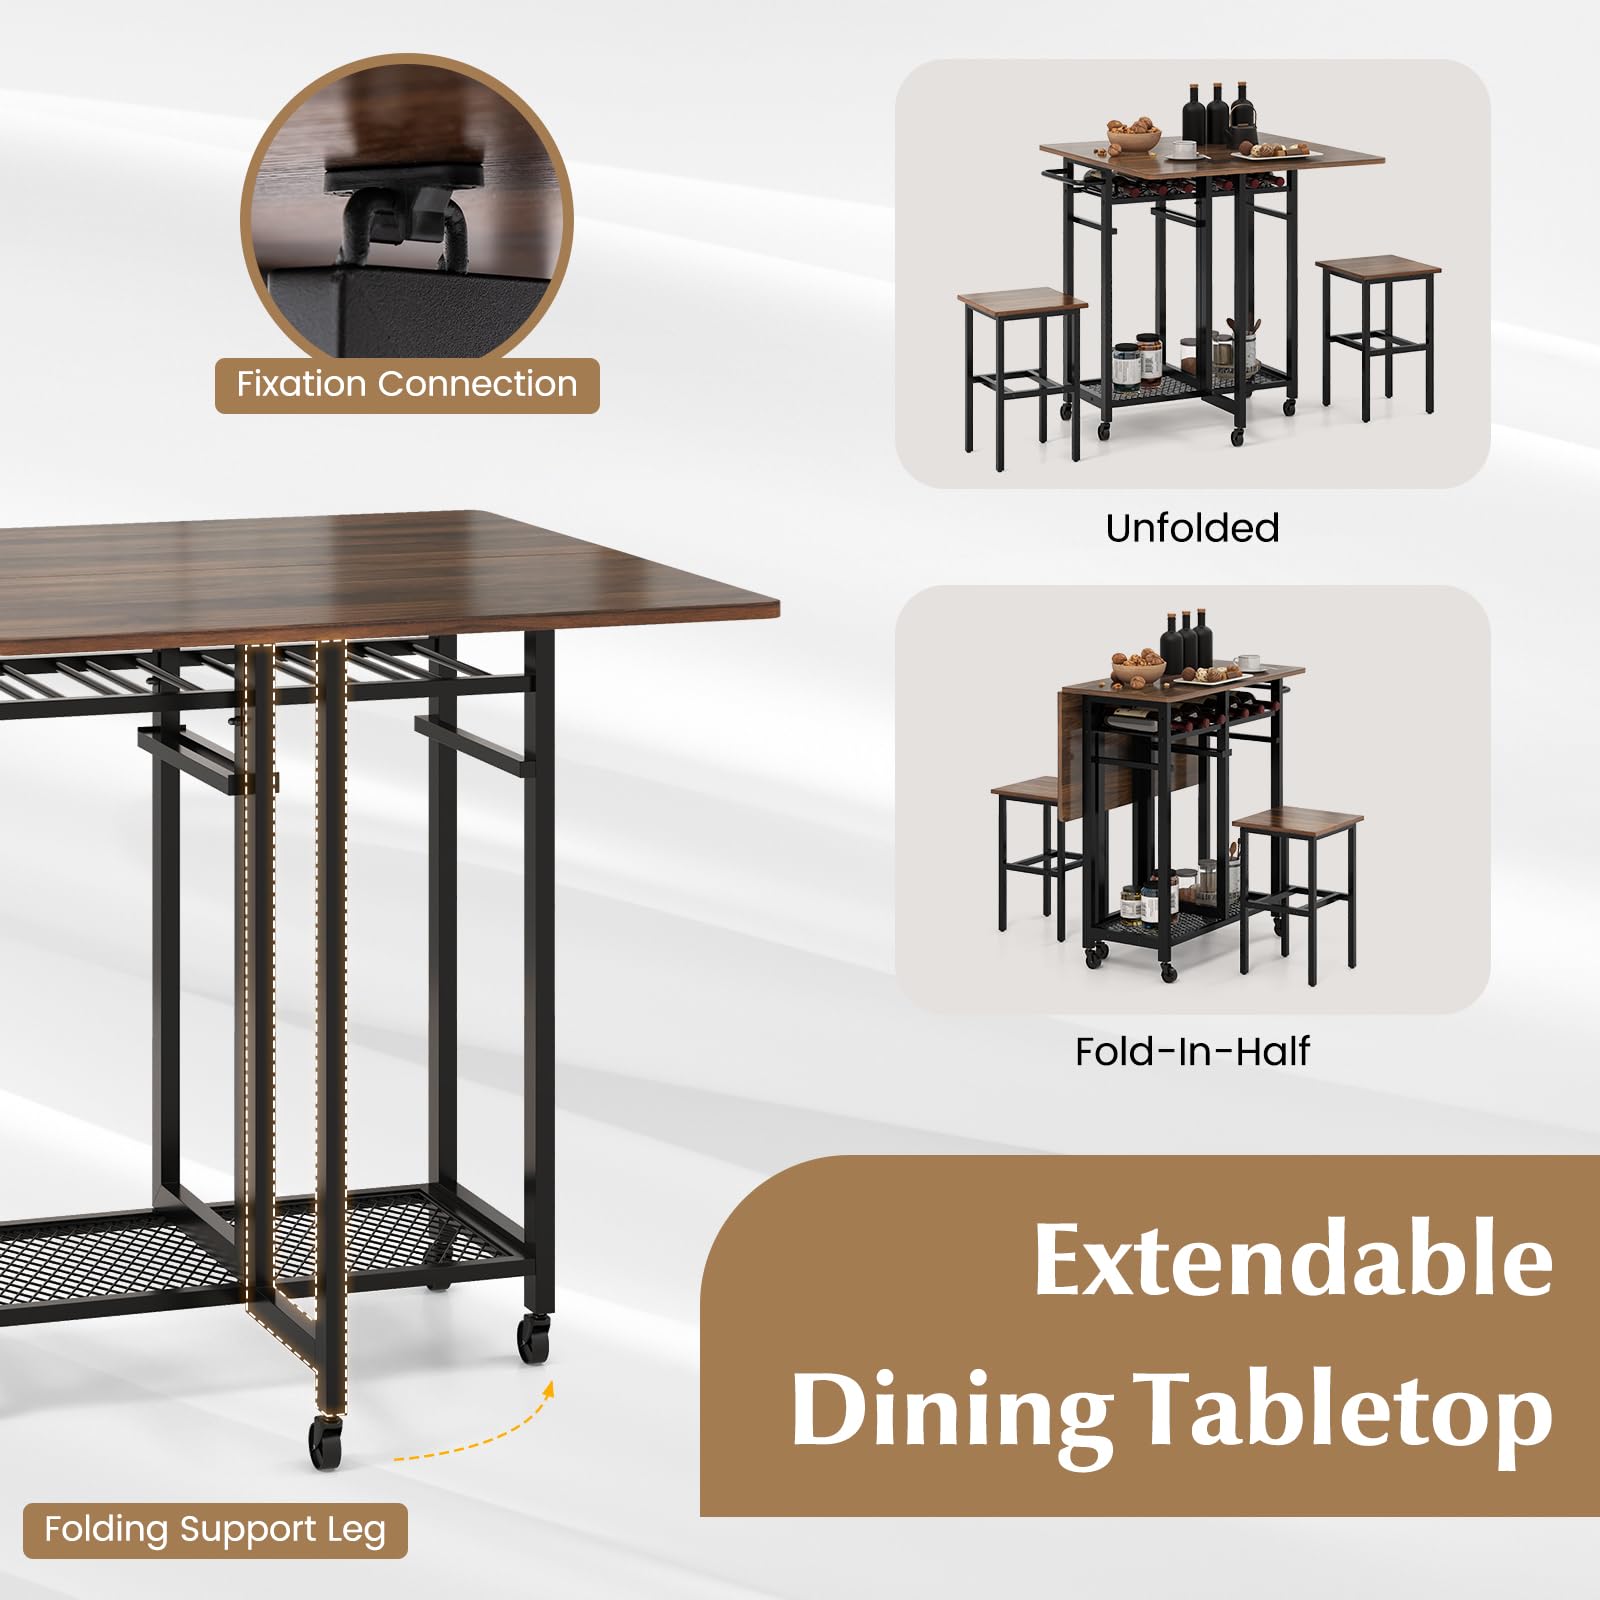 Giantex 3-Piece Foldable Dining Table Set, Extendable Dining Table & 2 Stools Set w/ 6-Bottle Wine Rack